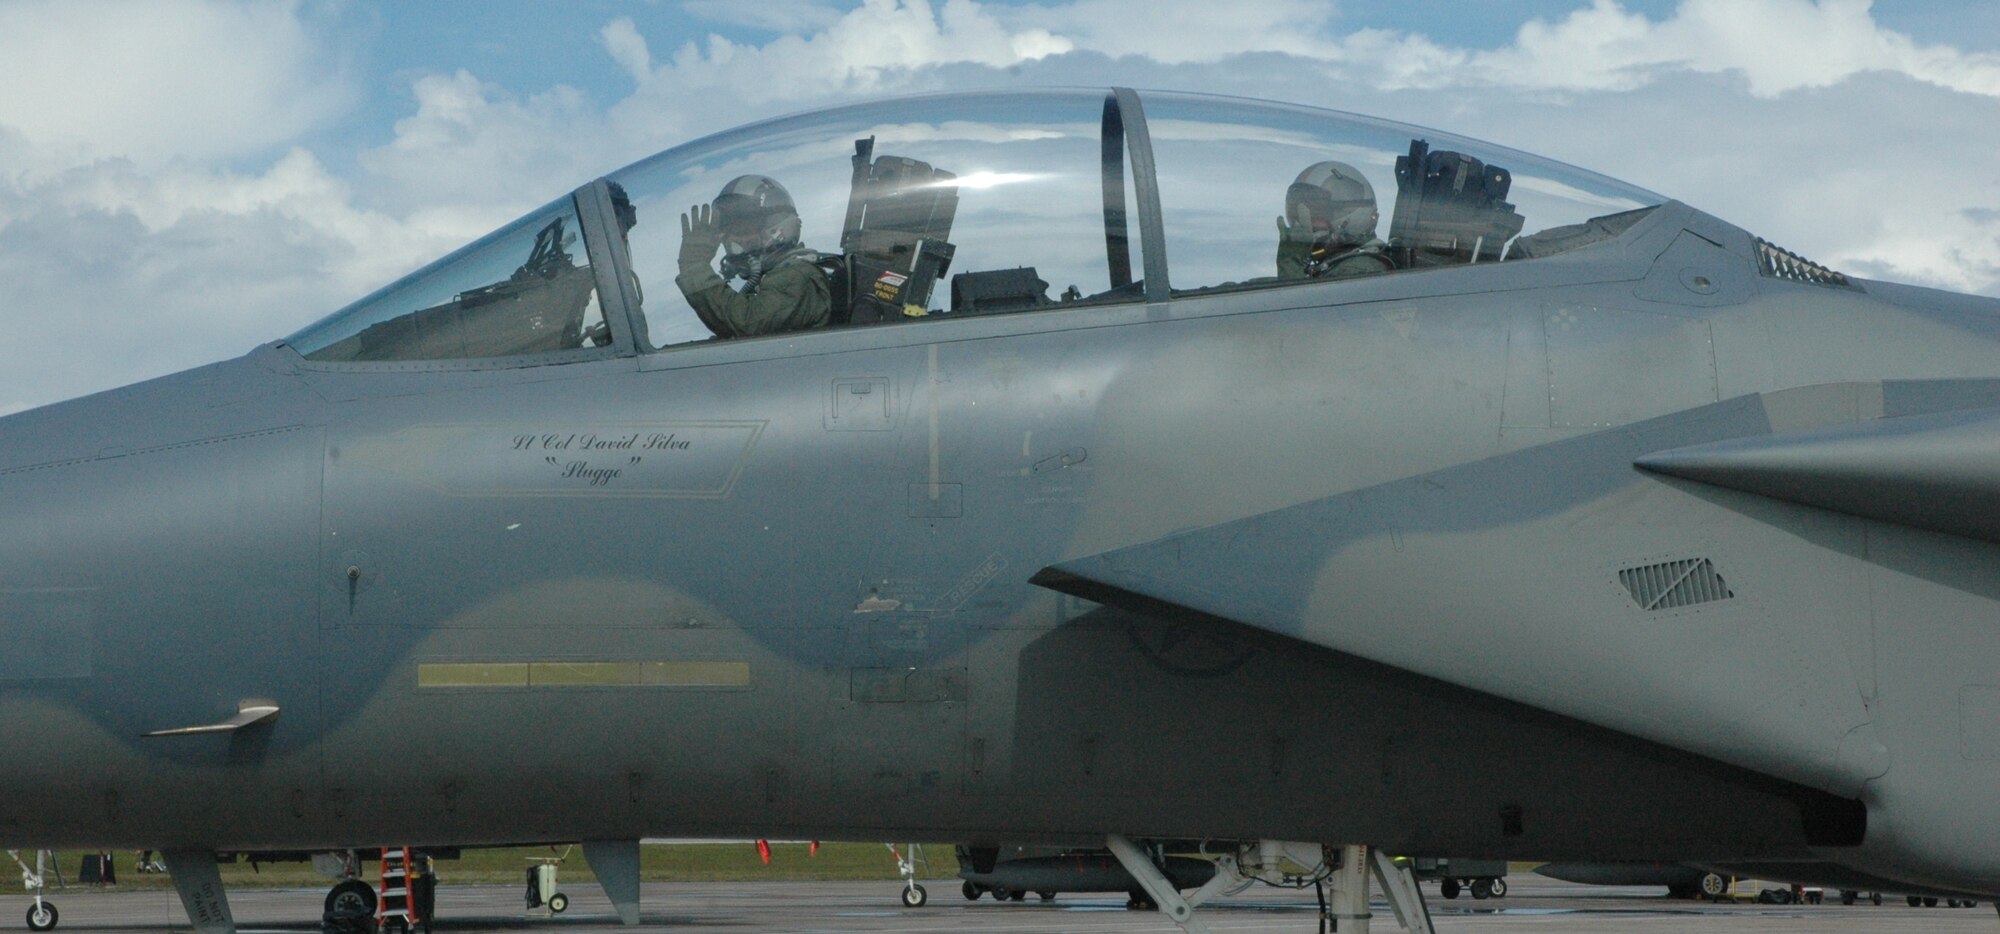 Todd Bender, a professional skeet shooter, receives an incentive flight in an F-15 eagle with Lt. Col. Brian Johnson, 601st Air Operations Control DMAAP chief, Thursday at Tyndall Air Force Base.  Mr. Bender is the current and 18-time World Champion for the National Skeet Shooting Association, who organized, raised money for and hosted last year’s first Wounded Warrior Clinic for the troops at Walter Reed and Bethesda Treatment Centers.  (U.S. Air Force photo/Senior Airman Anthony J. Hyatt)